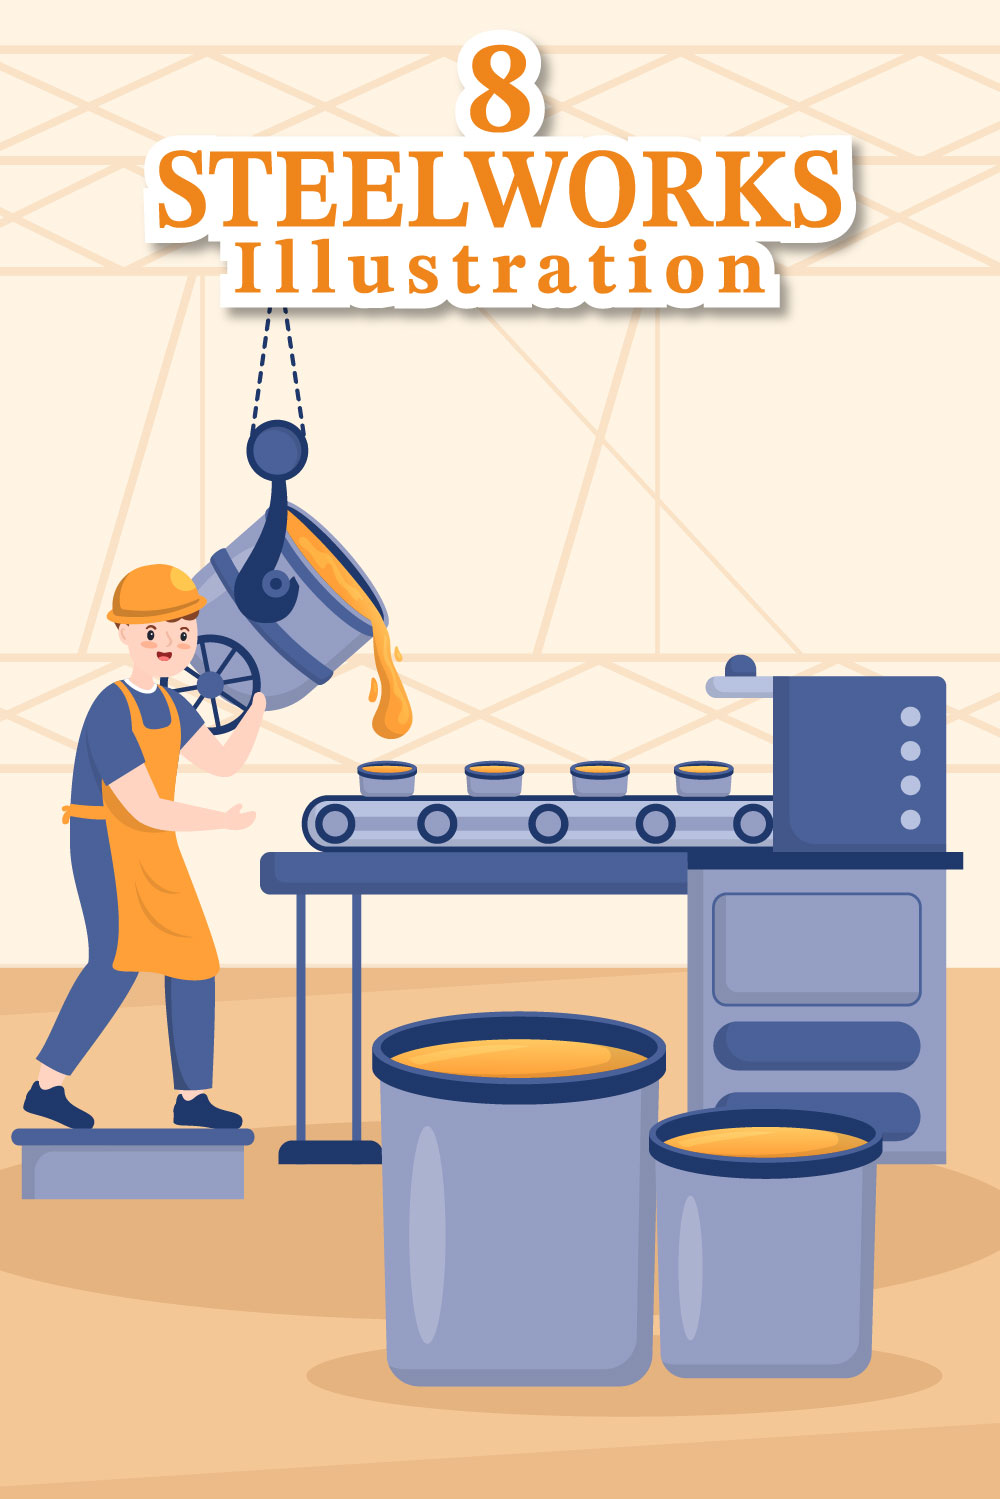 Steelworks and Hot Steel Pouring Cartoon Illustration pinterest image.